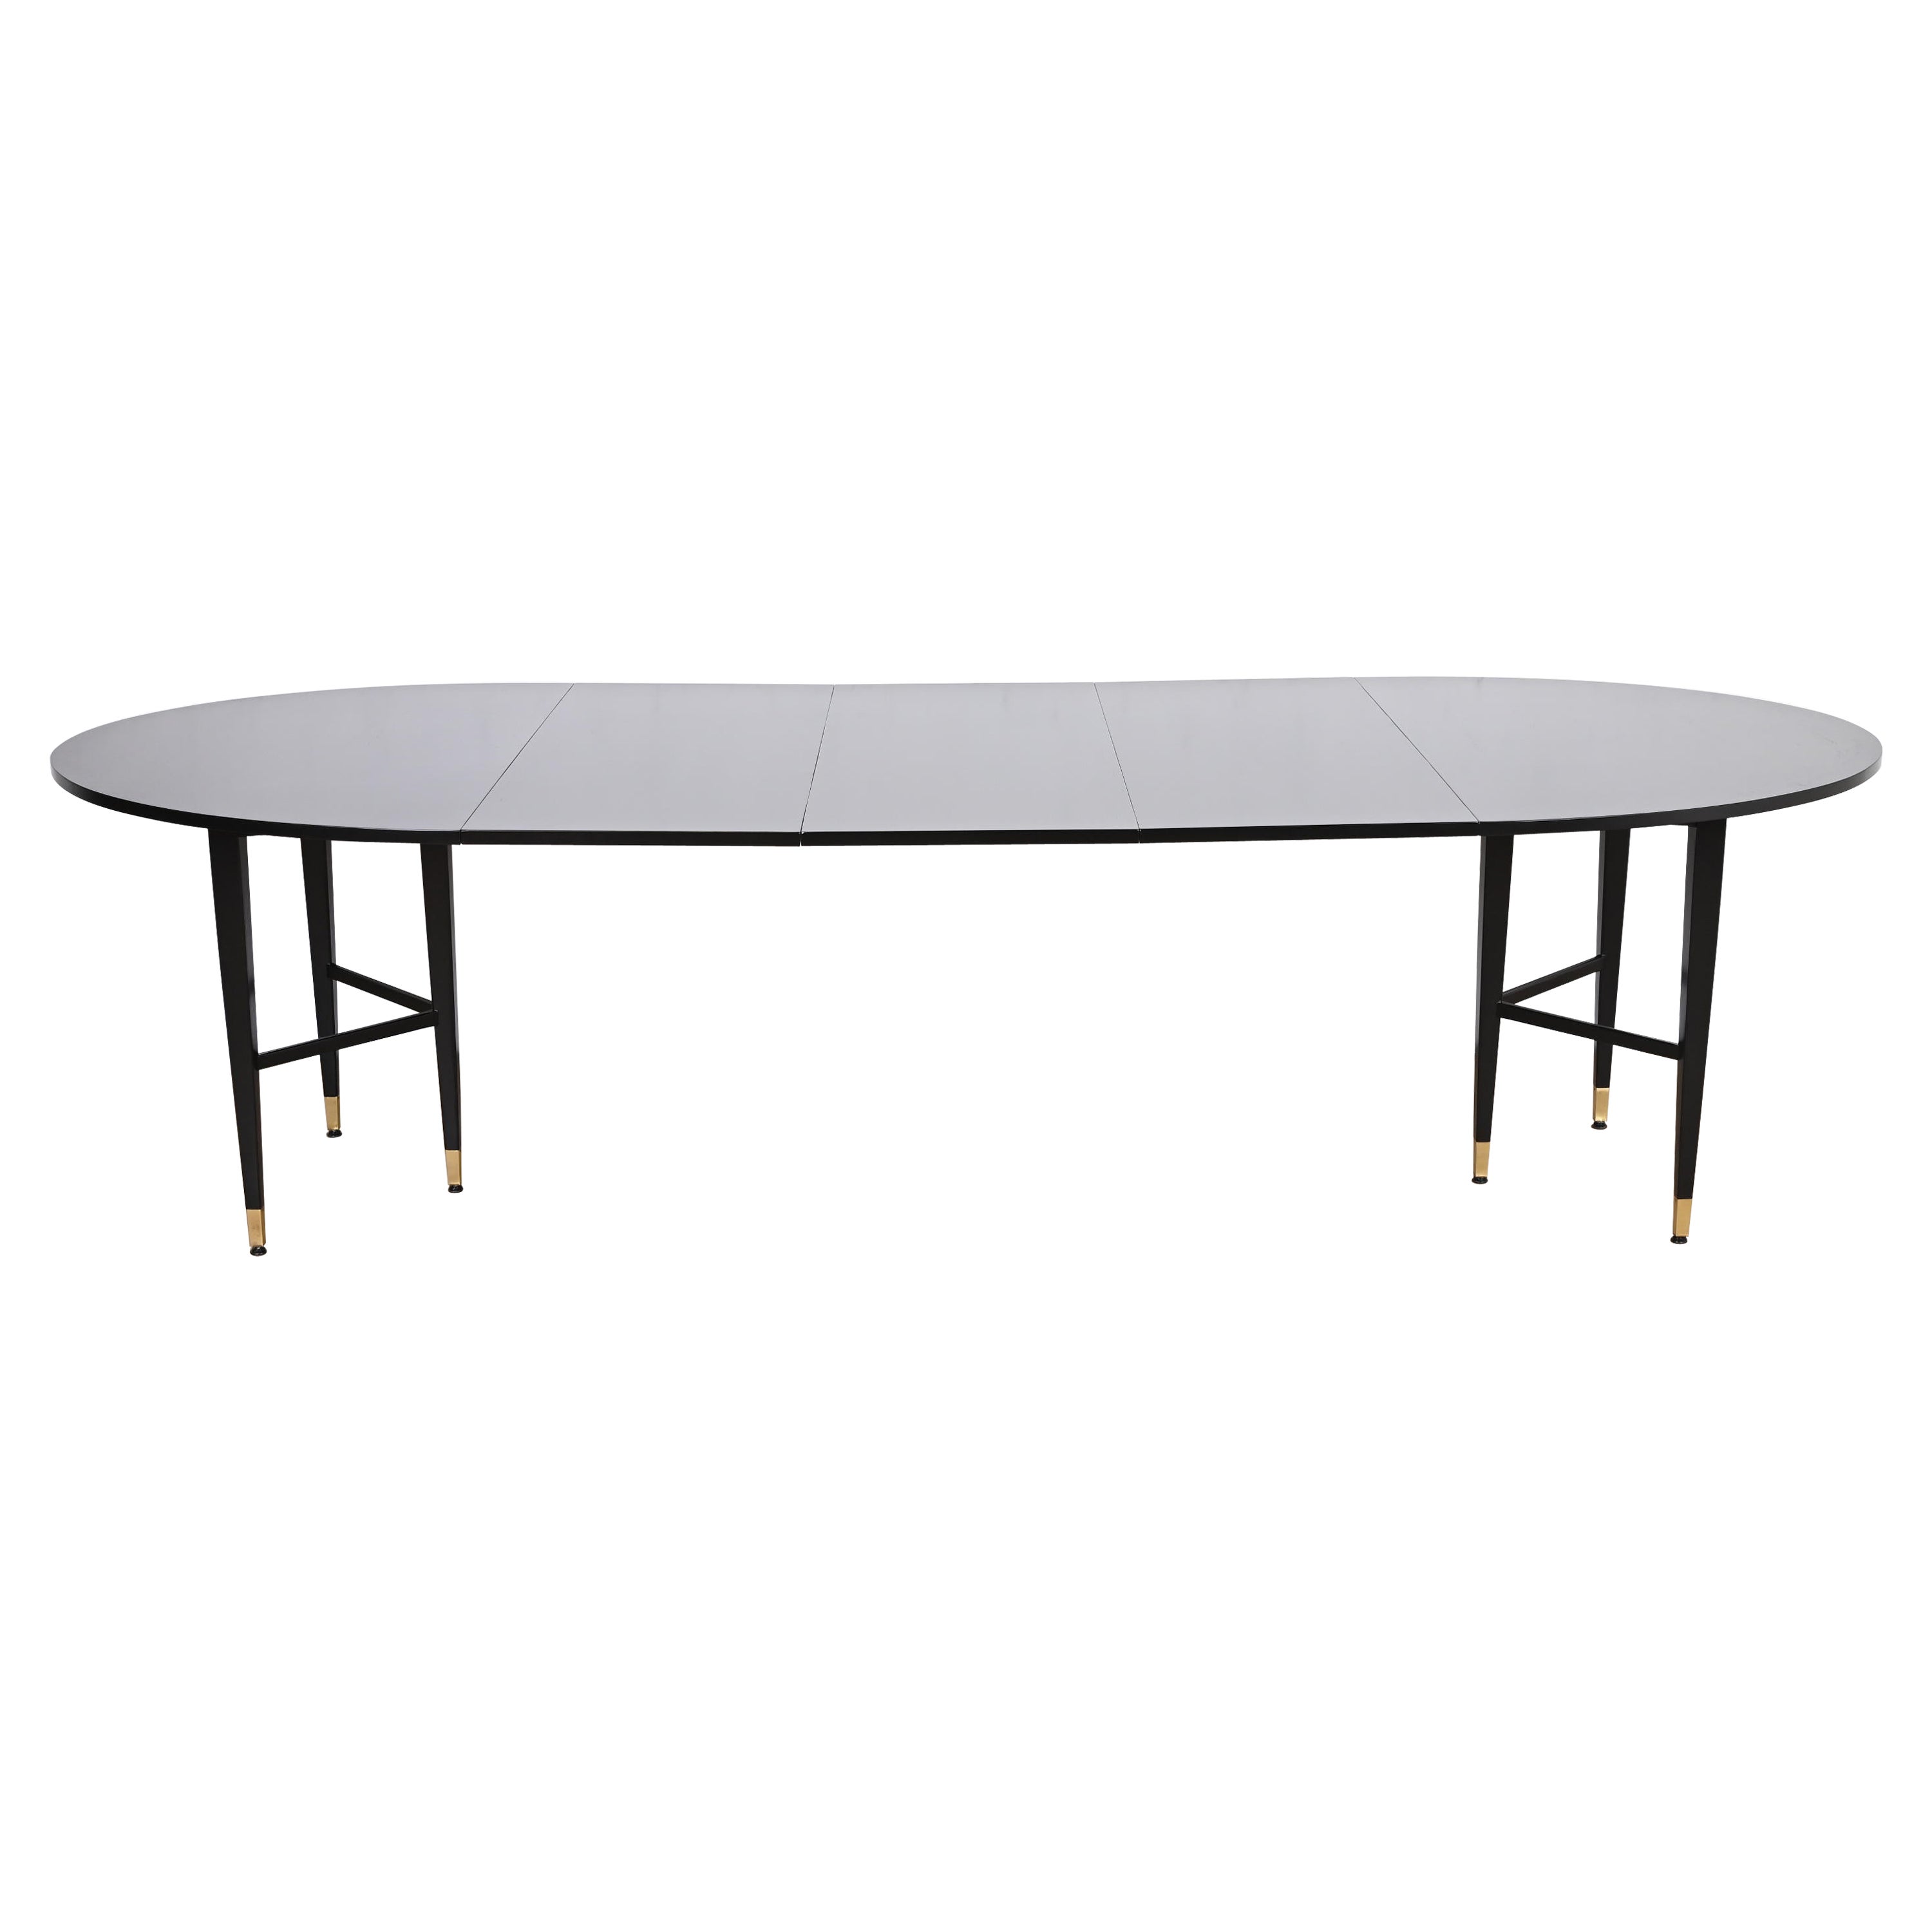 Baker Furniture Mid-Century Modern Black Lacquered Dining Table, Refinished